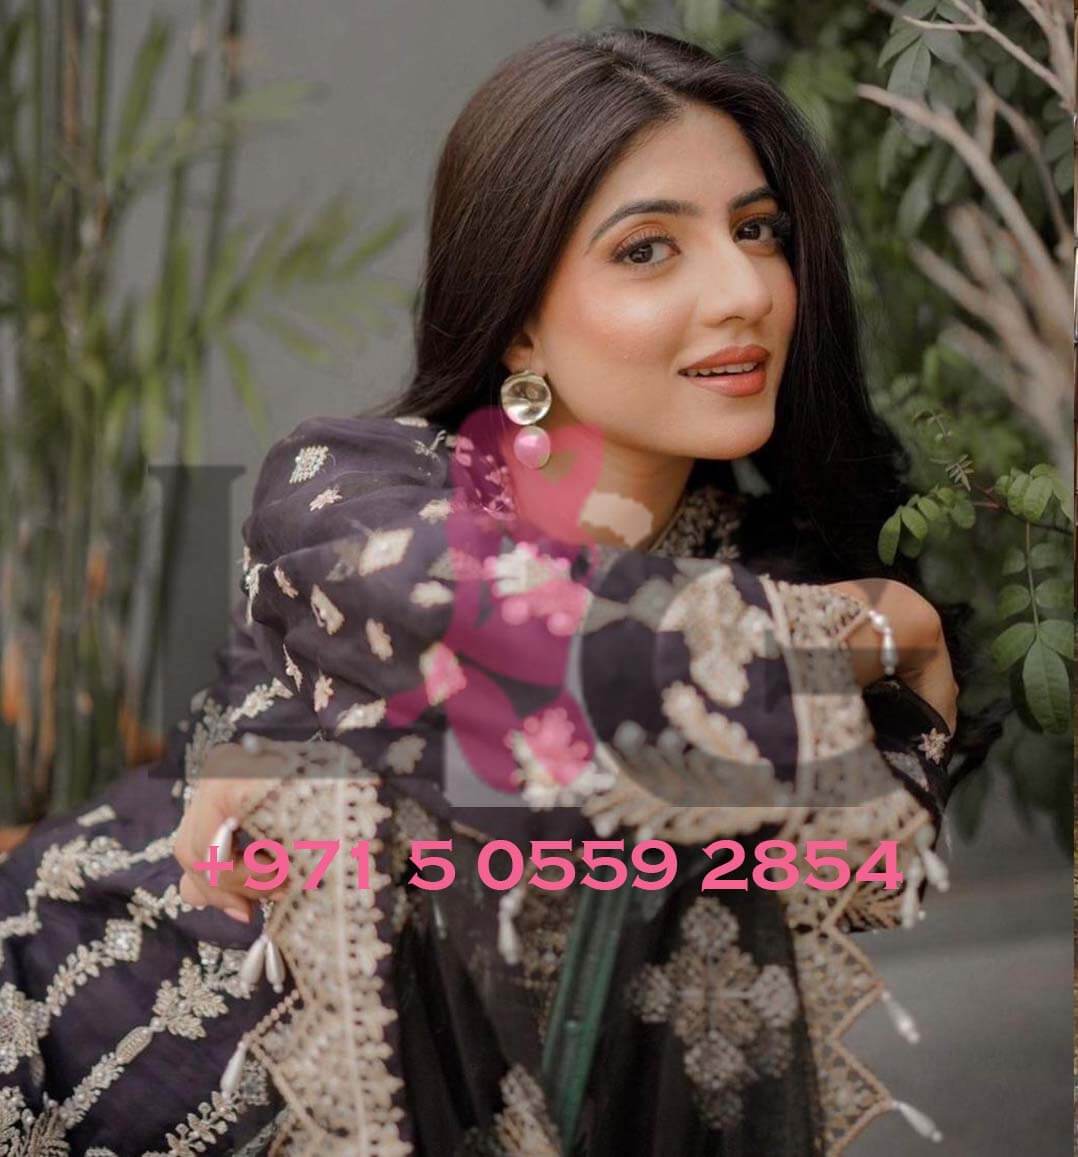 Indian Call Girls Services In Dubai